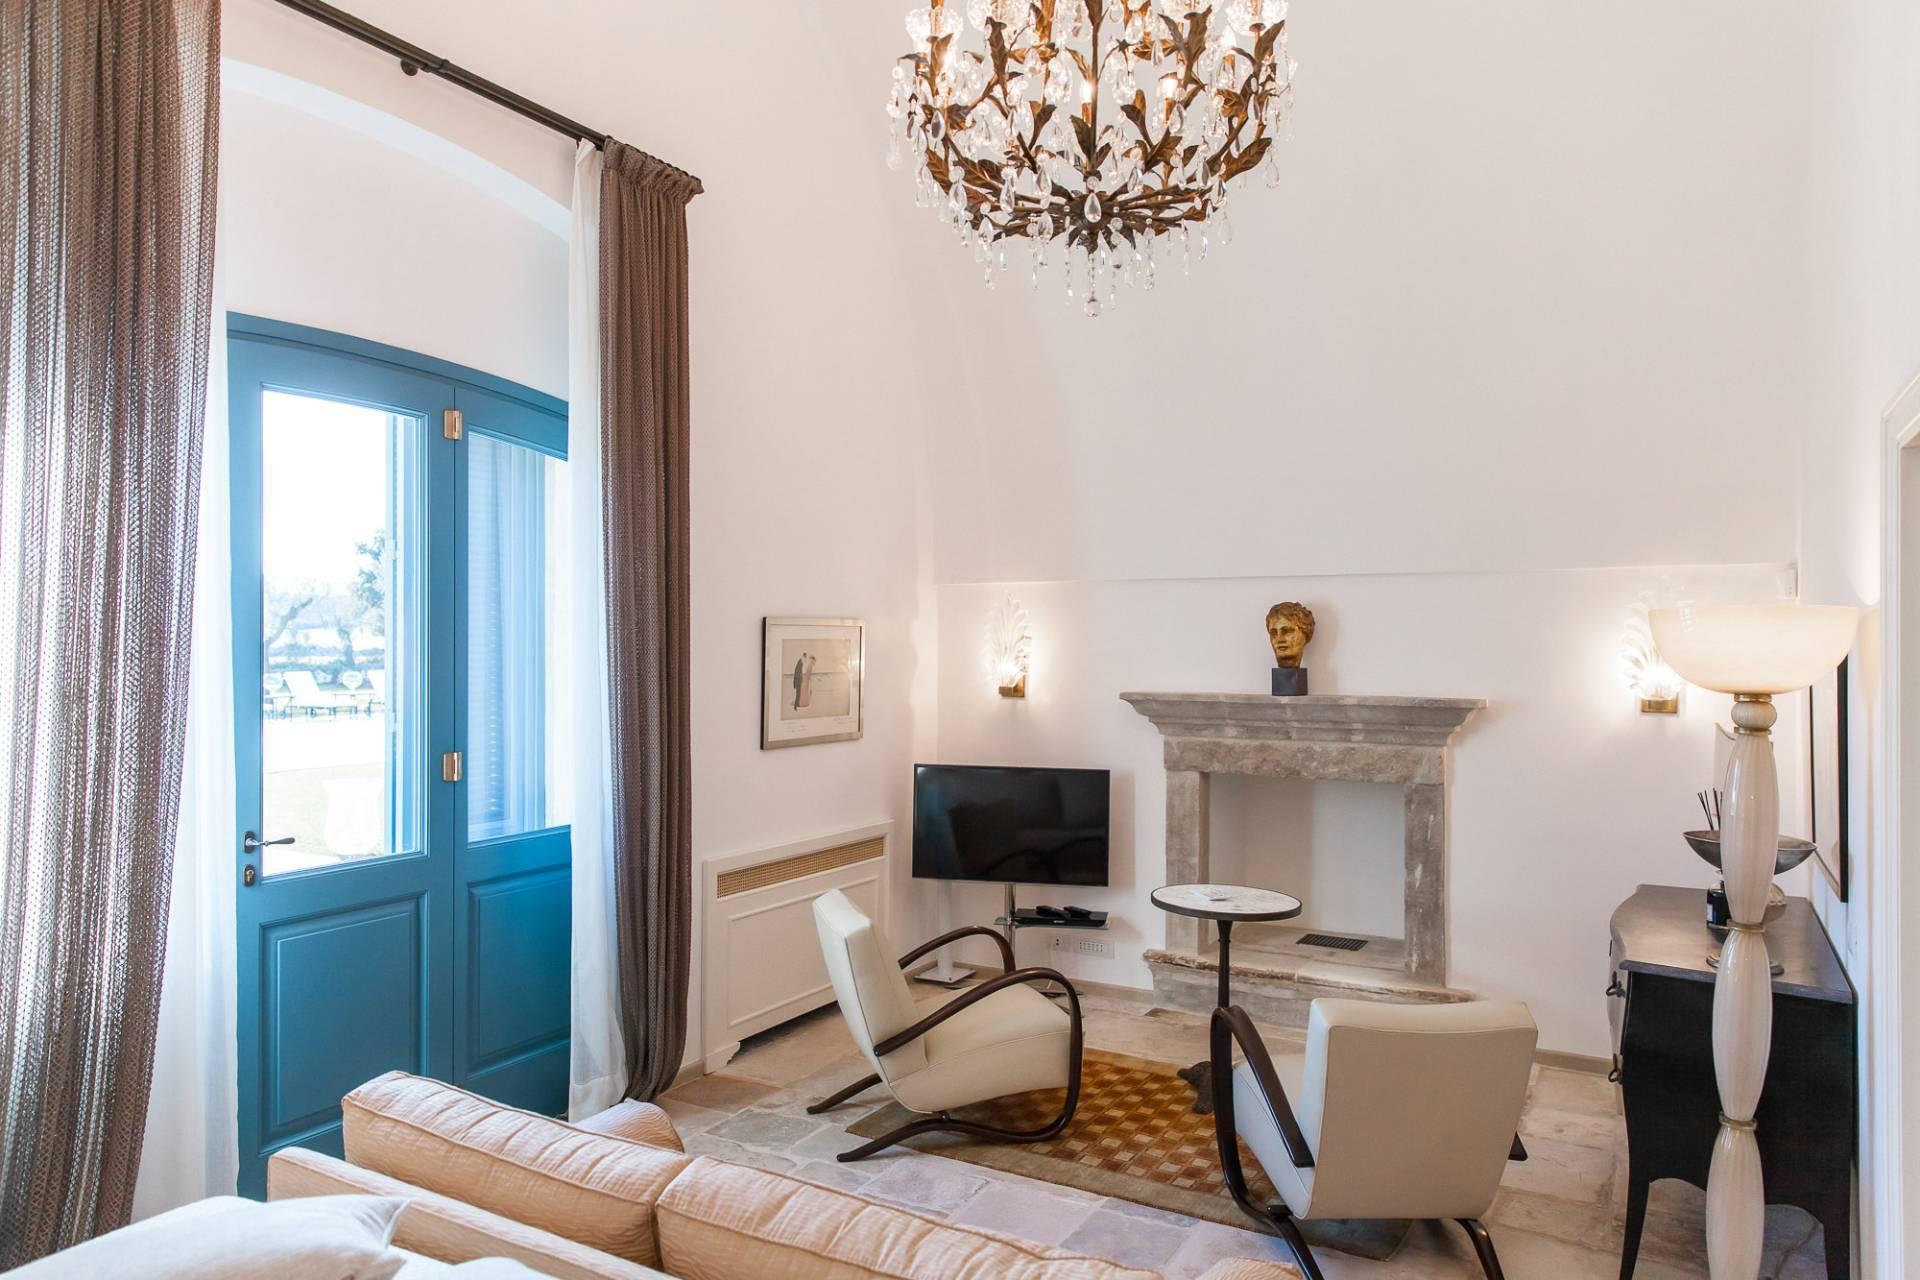 A historic estate with modern luxury in the heart of Puglia - 12